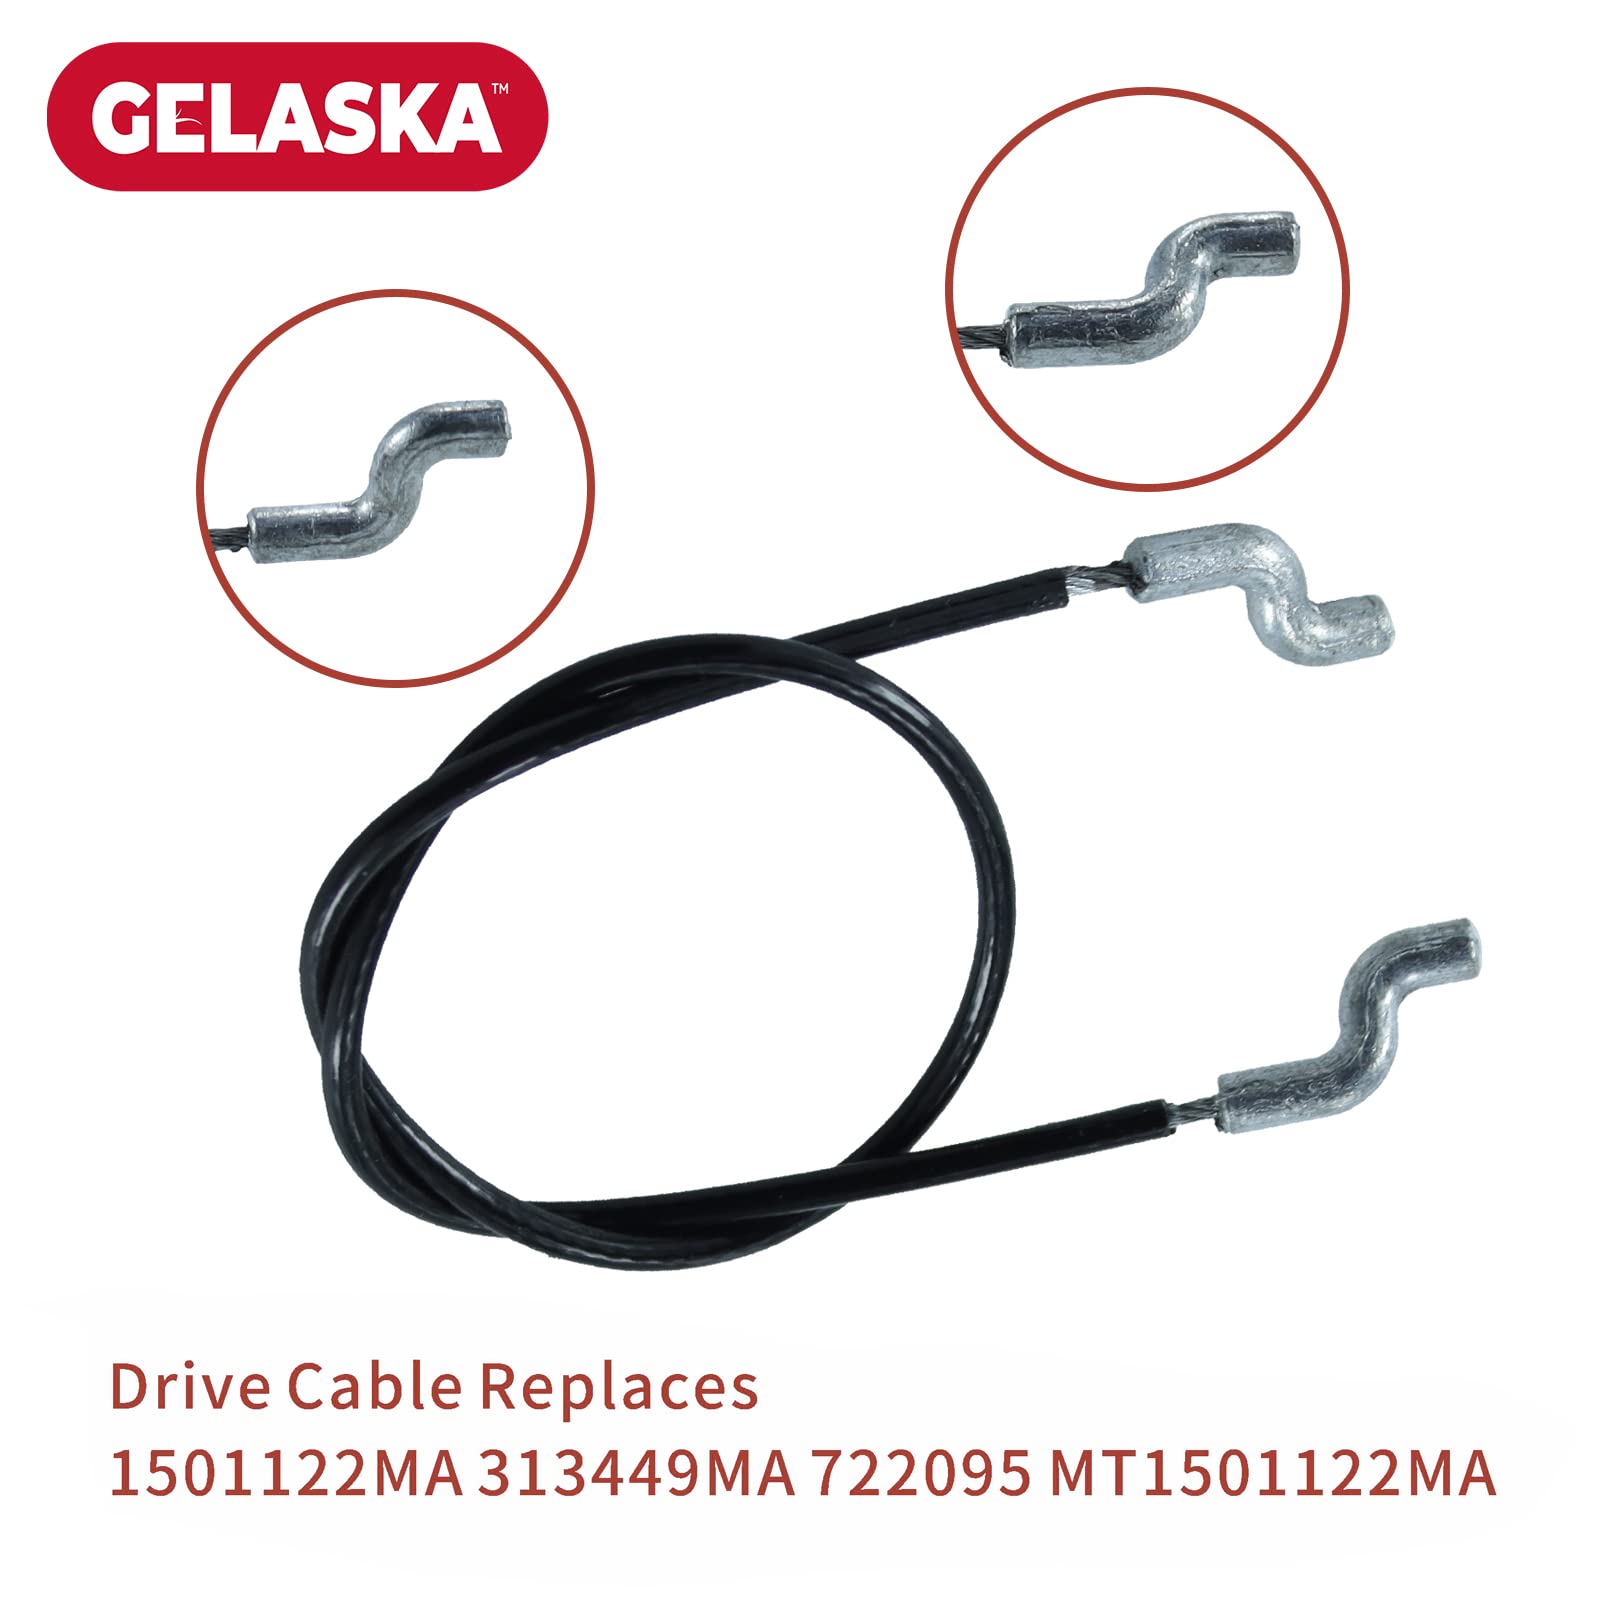 GELASKA 302565MA Rubber Auger Paddles with 55323MA Scraper Blade 1501122MA Cable 762259MA Cable Replaces 302565, 1687312YP, 1687312, 1687312SM, 723006 for Craftsman Murray Snapper 20" 21" Snowthrowers